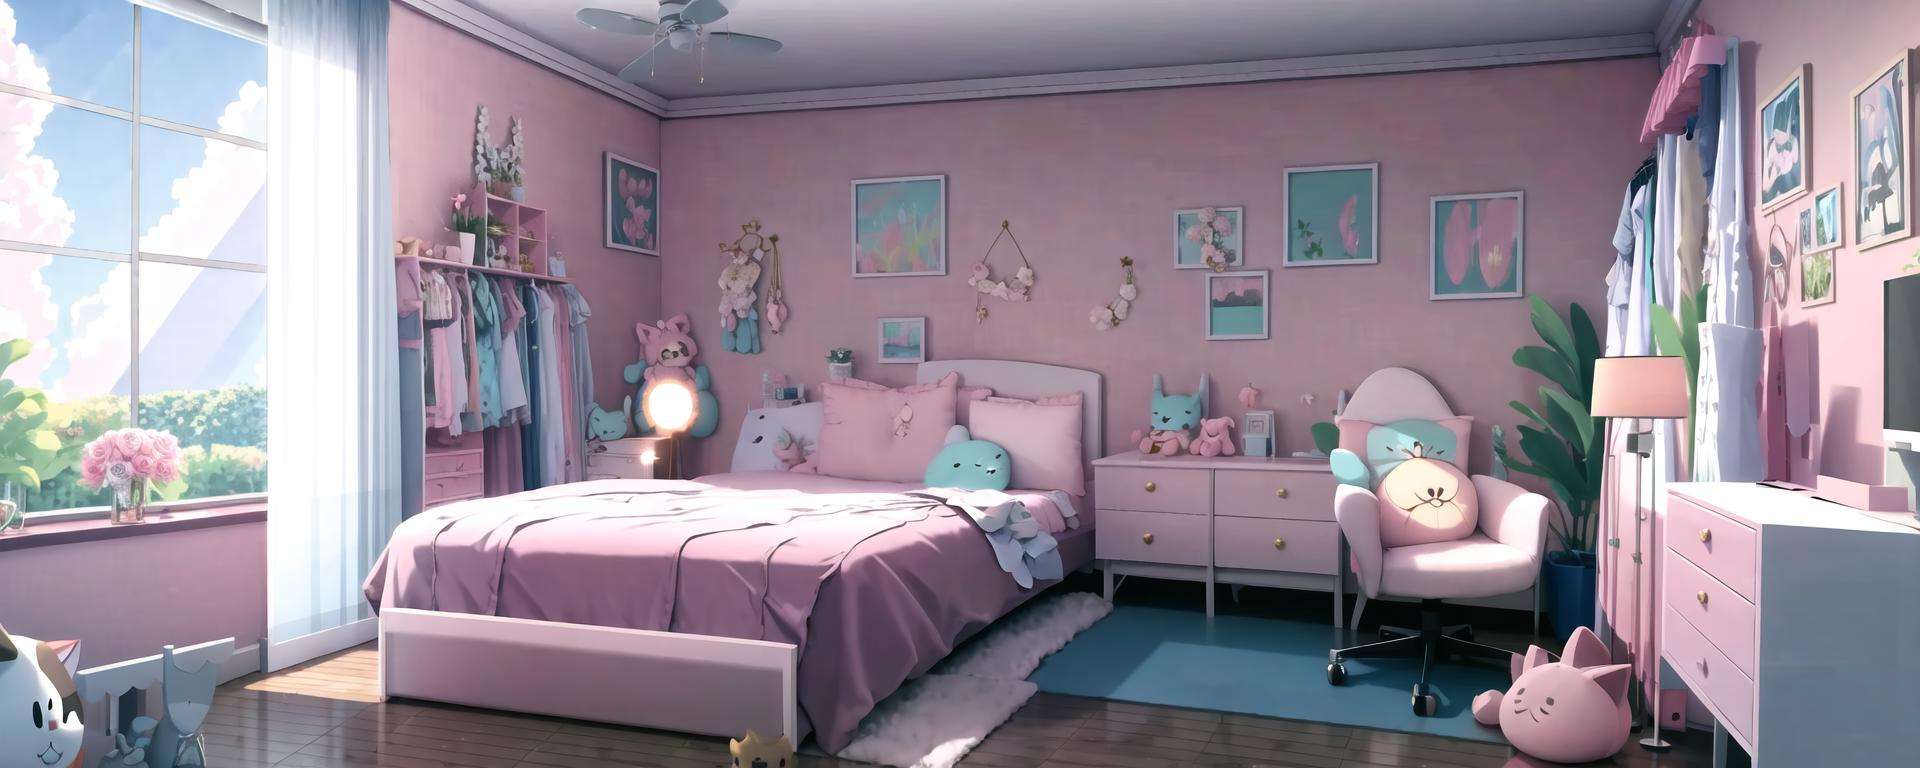 Bare thigh,extremely detailed CG unity 8k wallpaper,illustration,lens 135mm,masterpiece, best quality, no humans, flower, virtual youtuber, indoors, bed, pillow, window, stuffed toy, girl’s bedroom,table, cat, stuffed animal, bell, chair, curtains, cloud, microphone, rose, day, white flower, neck bell, english text, sky, plant, scenery,pink tone ,no human<lora:room:1>